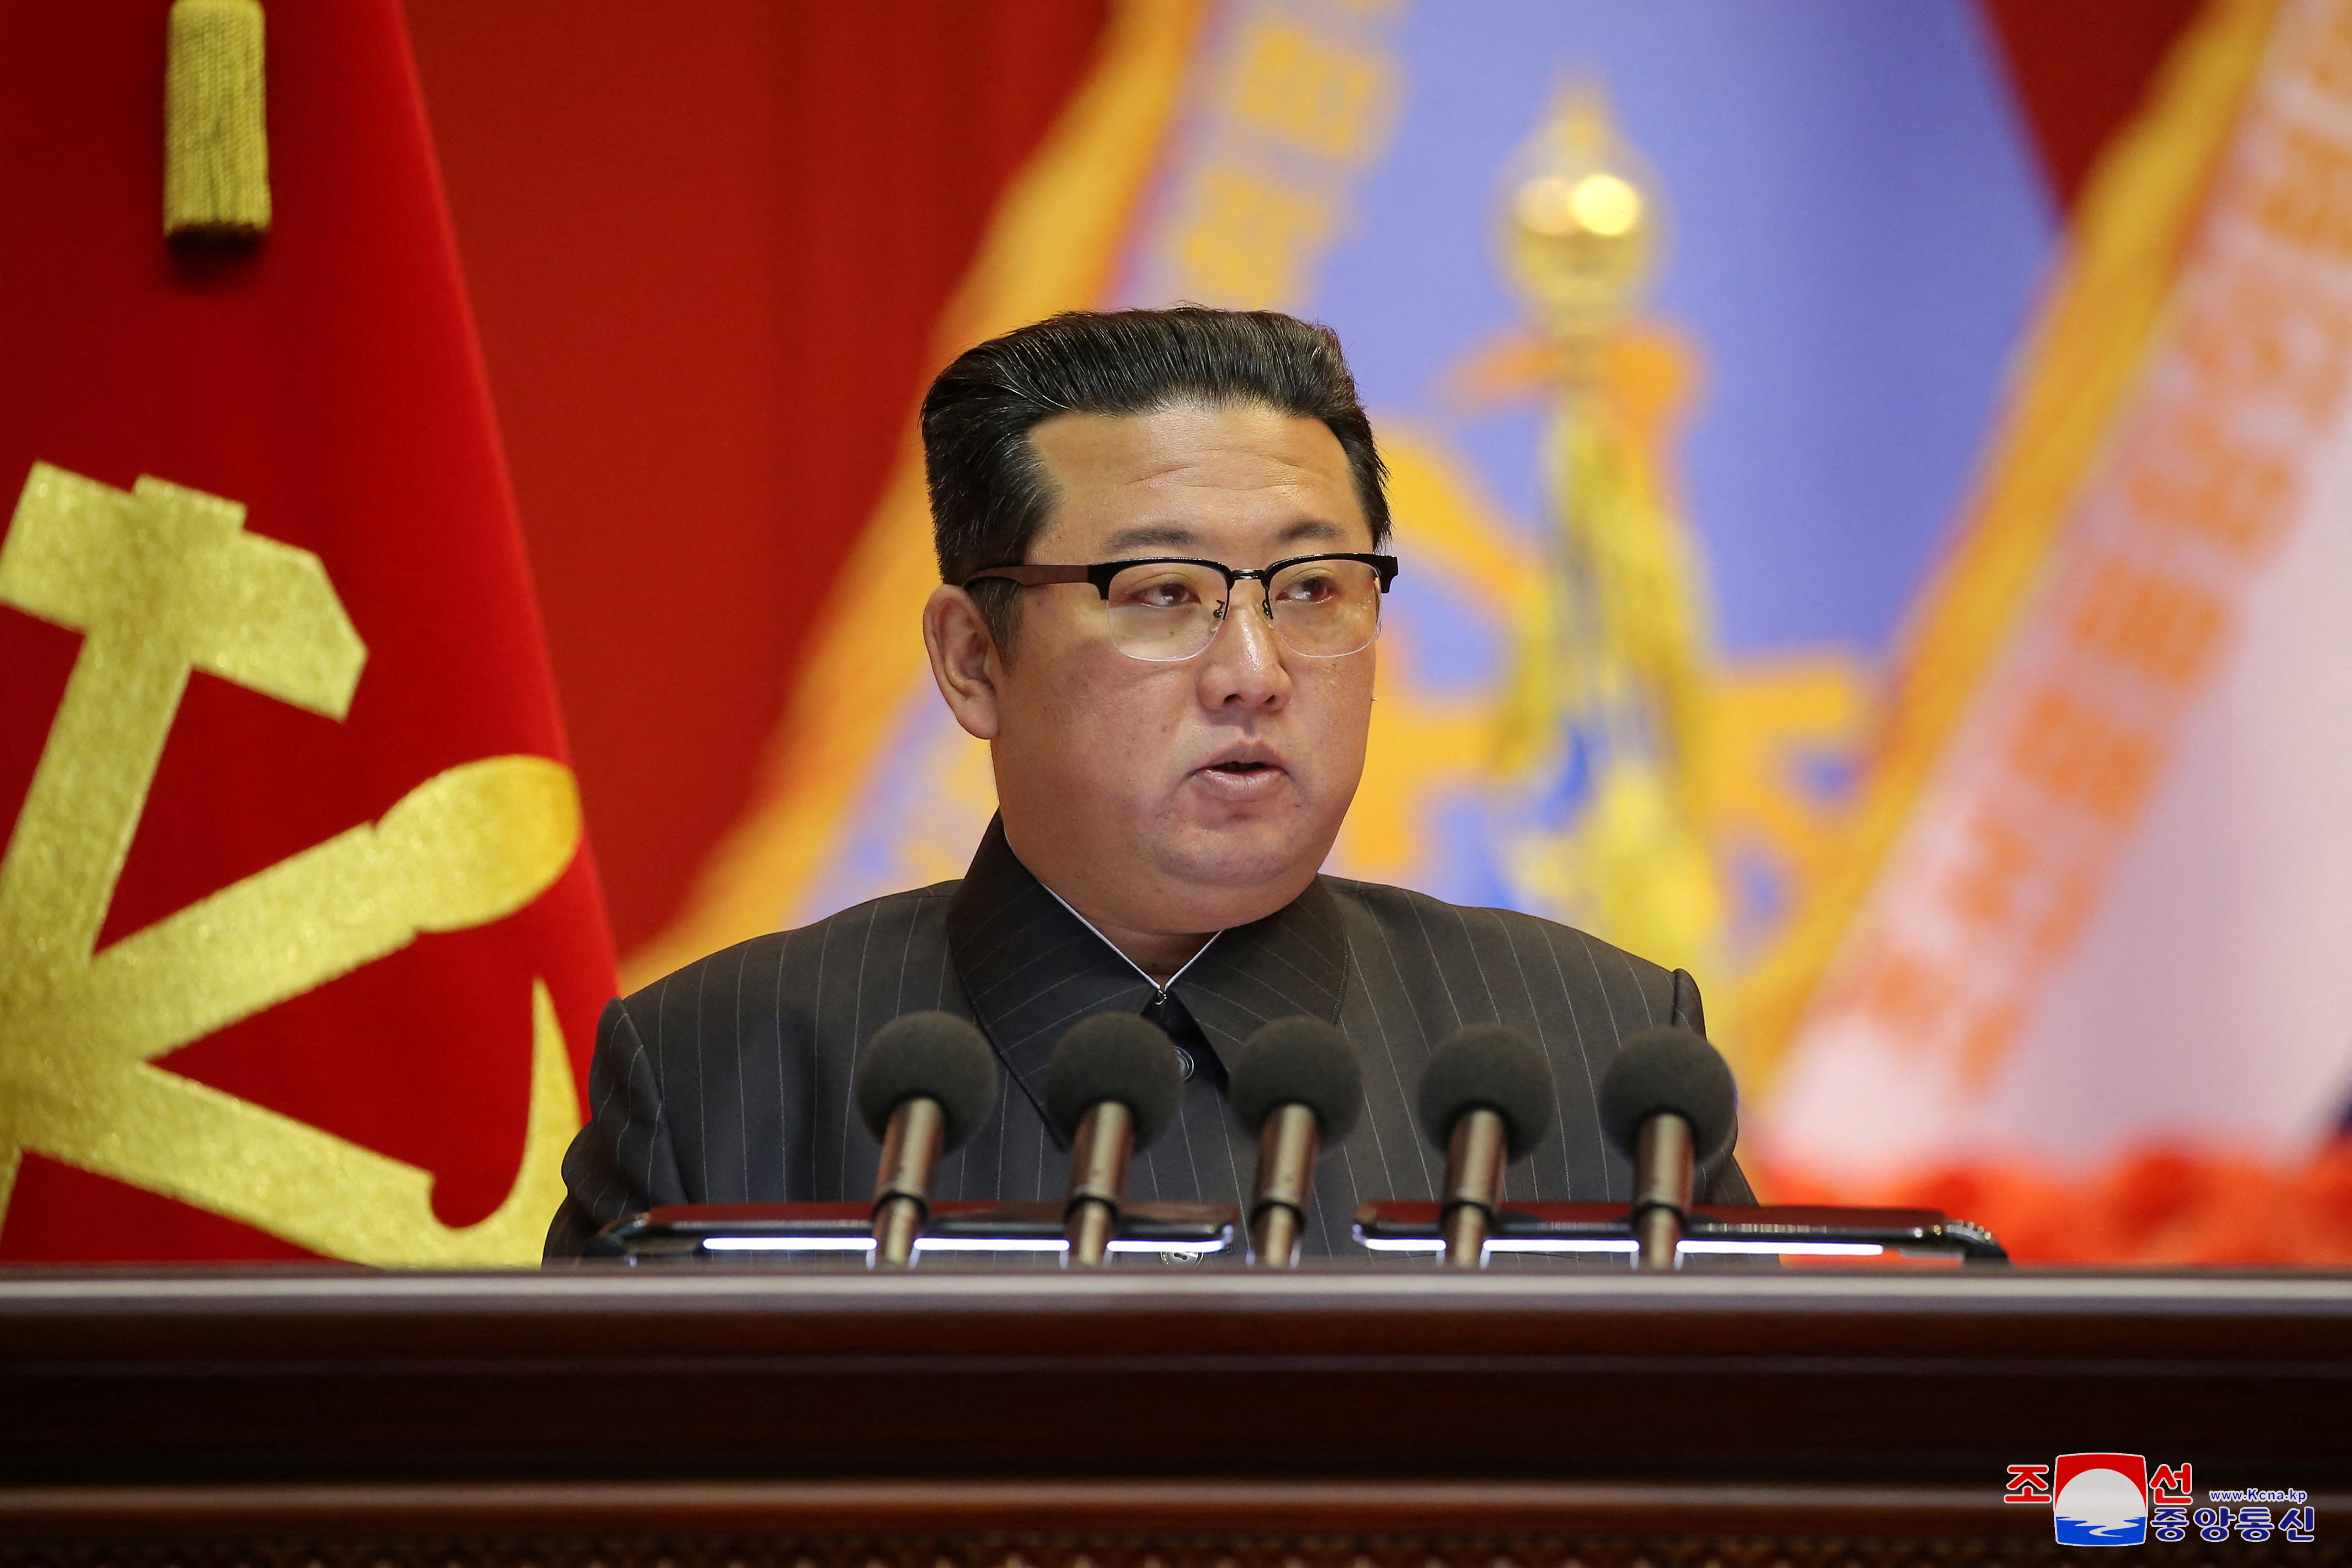 North Korean leader Kim Jong Un speaks during the Eighth Conference of Military Educationists of the Korean People's Army at the April 25 House of Culture in Pyongyang